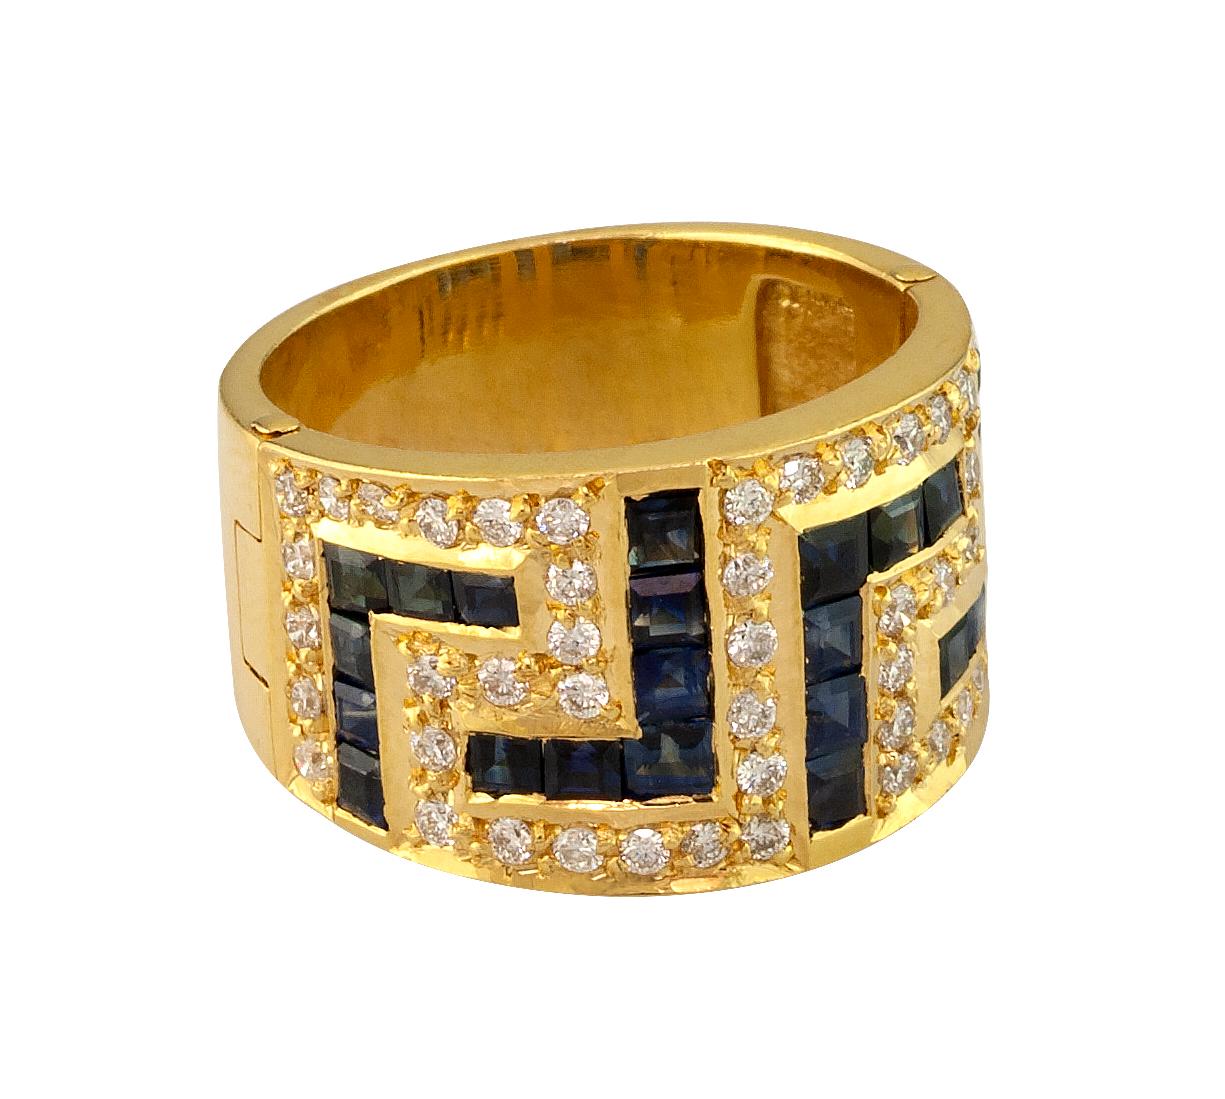 S.Georgios designer 18 Karat Yellow Gold Ring featuring the Greek Key design symbolizing eternity. It has 48 Brilliant Cut White Diamonds total weight of 0.65 Carat and 24 Princess cut  Sapphires total weight of 2.40 Carat. The quality of the stones